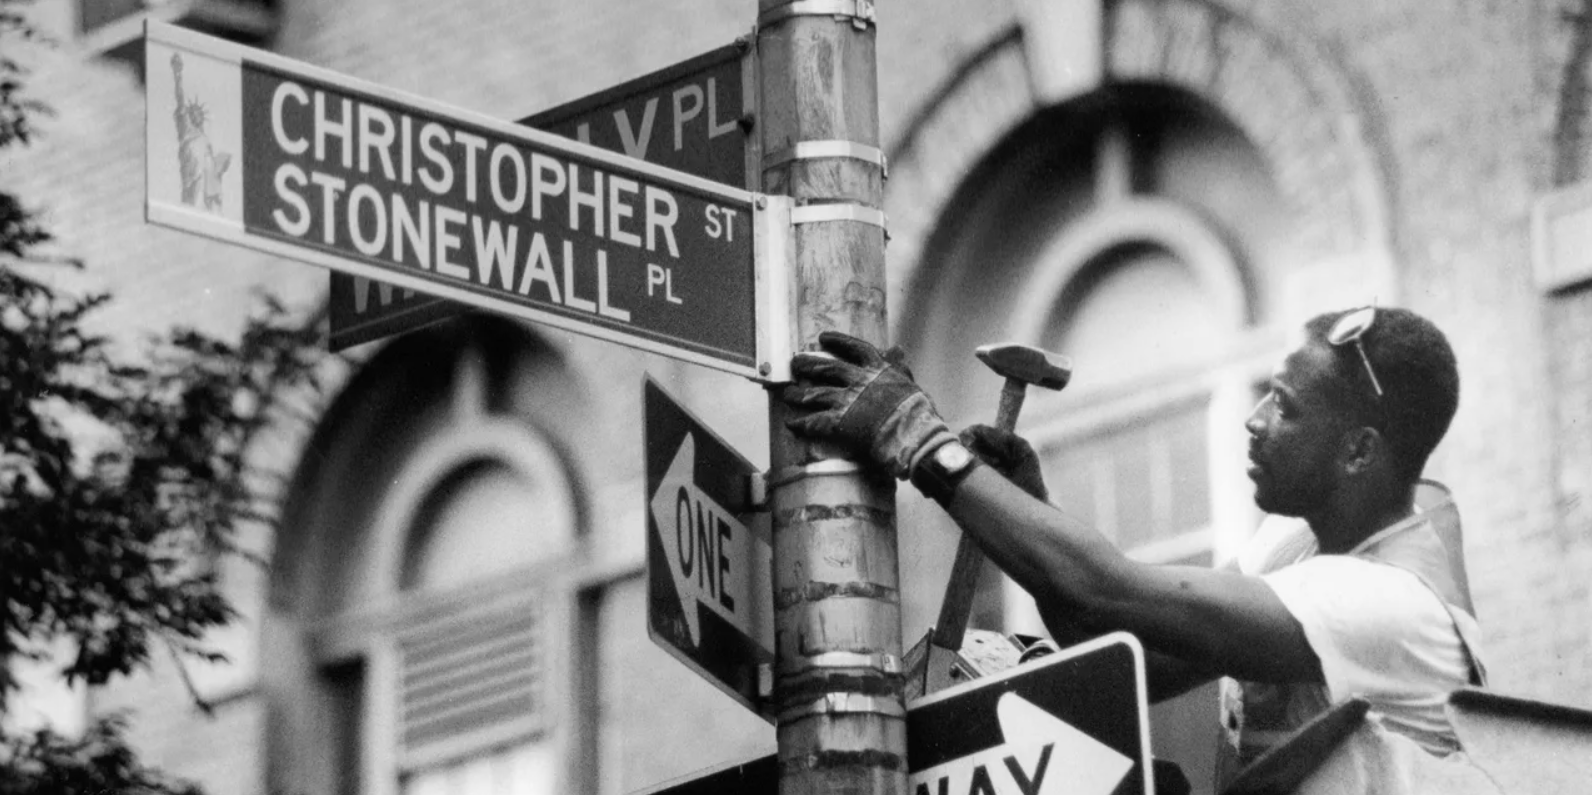 Darryl Beckles, a traffic device worker in New York City, changes the street sign on Christopher Street in Greenwich Village